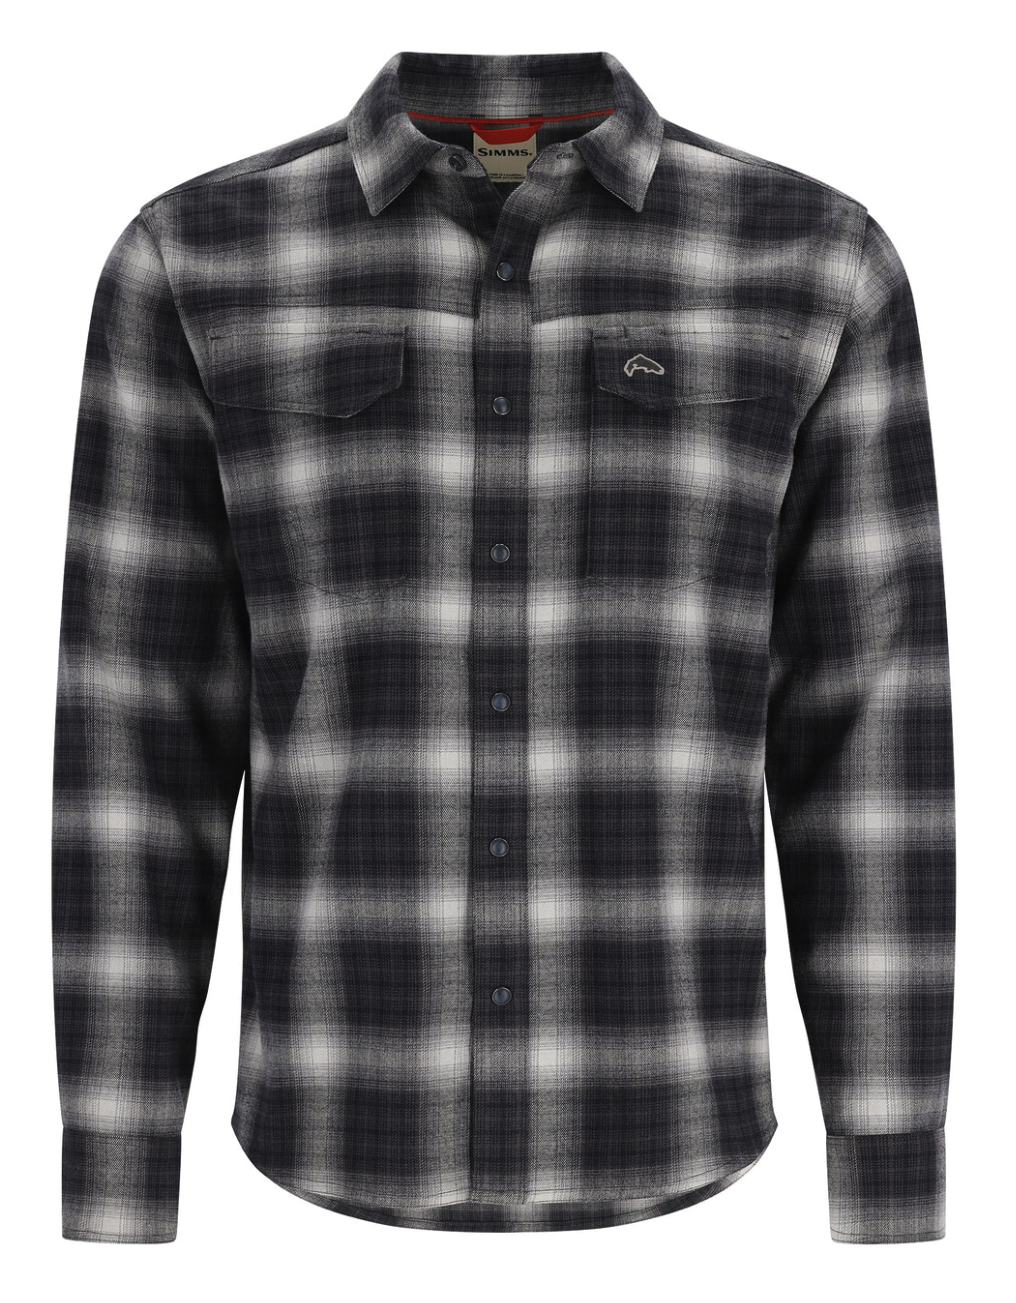 Best plaid fishing shirts for sale online.